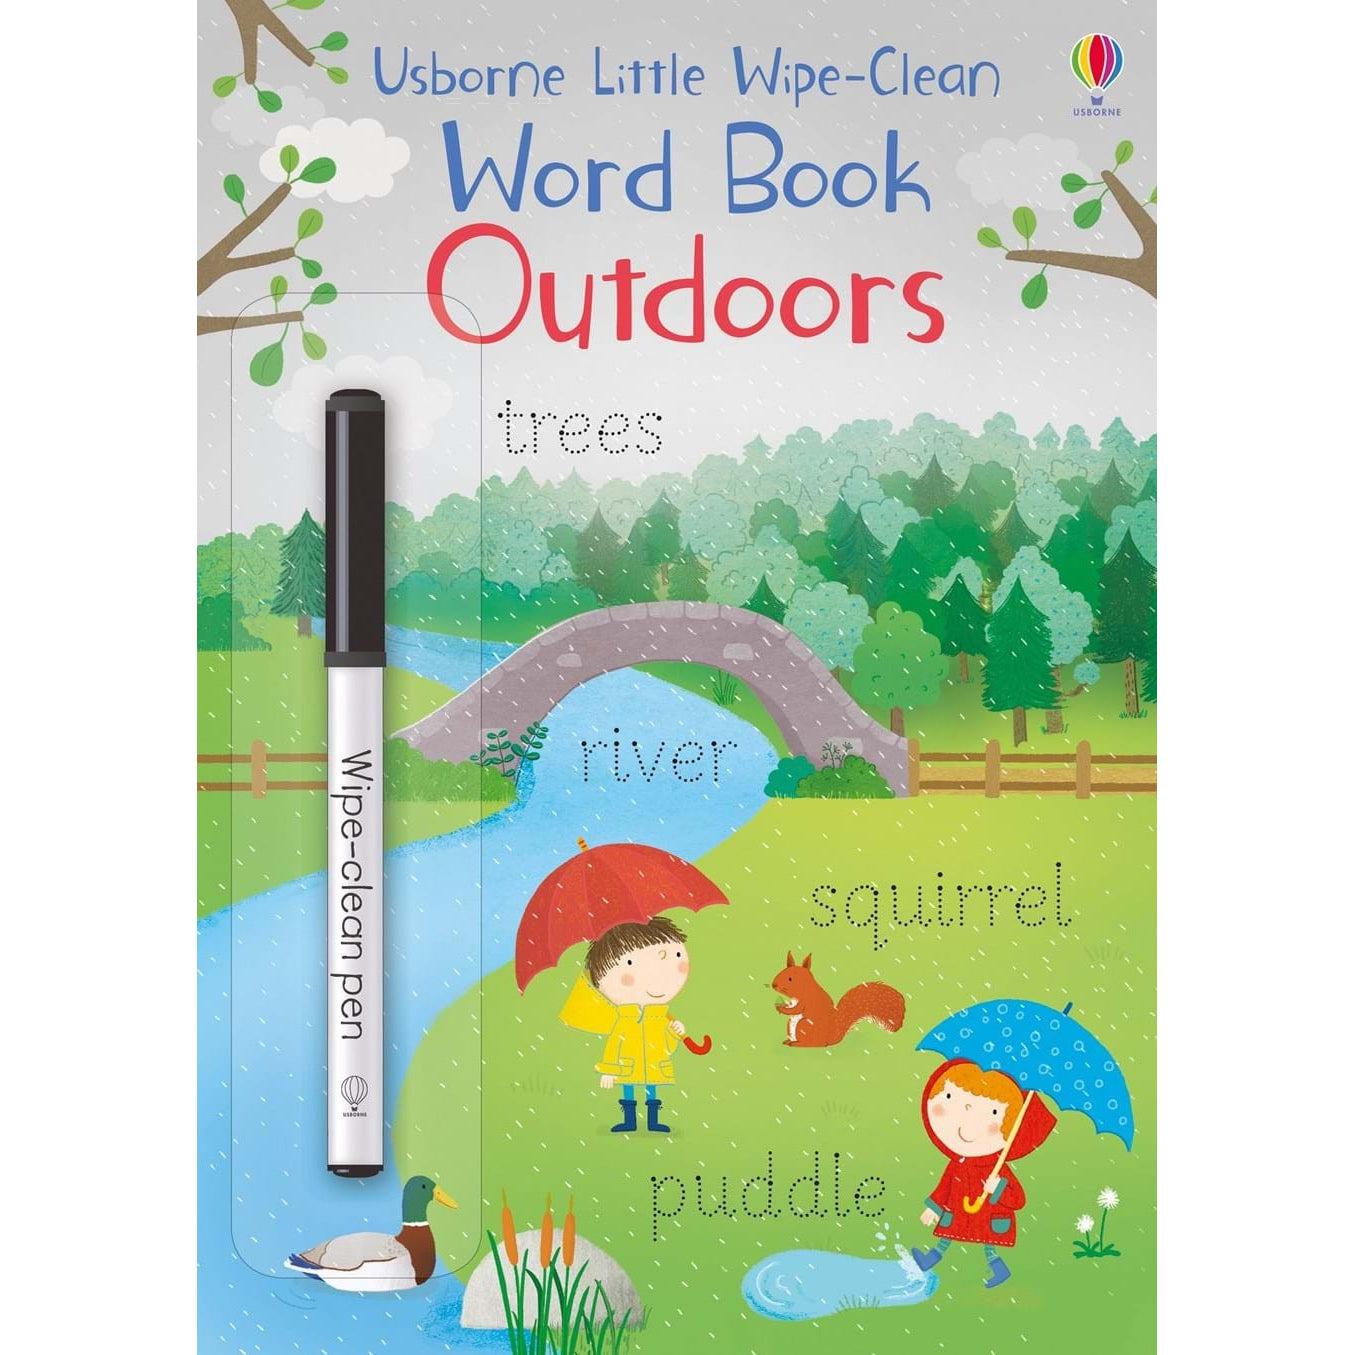 Little Wipe-Clean Word Books Outdoors